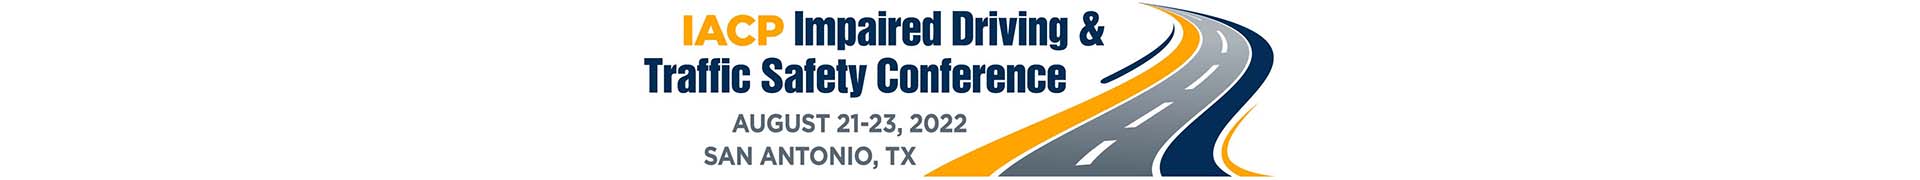 International Training Conference on Impaired Driving Traffic Safety Enforcement  Event Banner